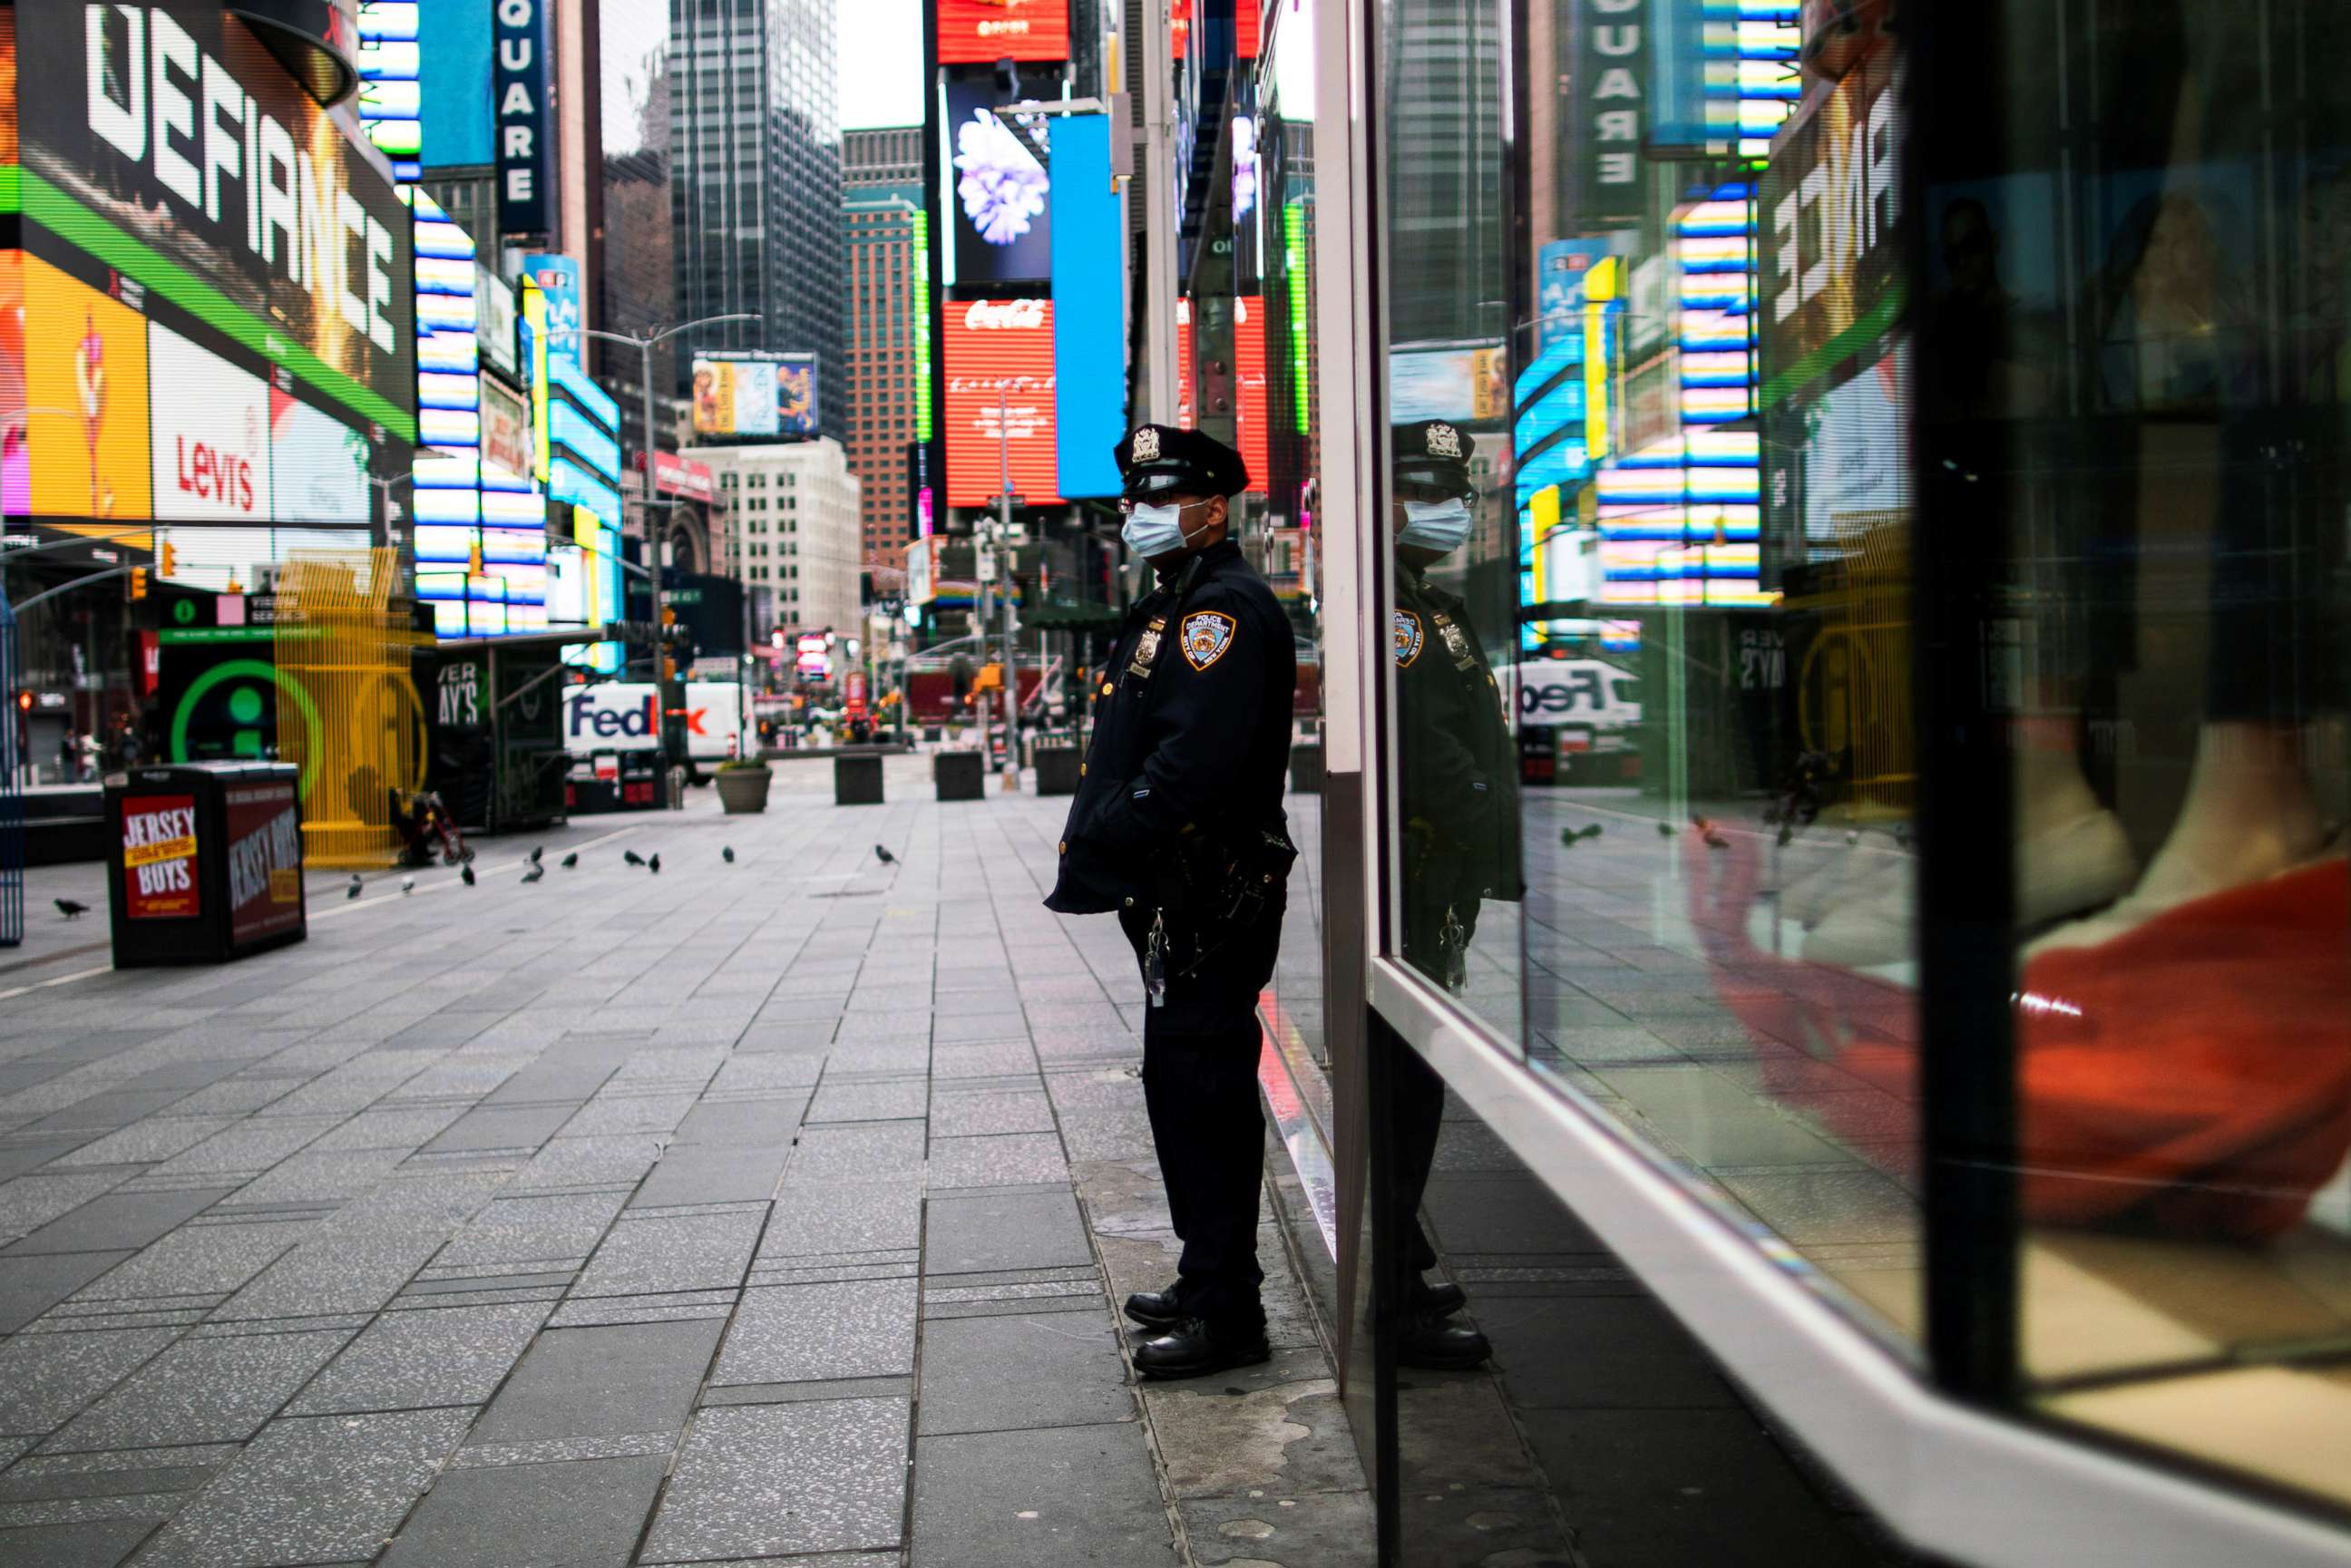 PHOTO: A New York Police officer stands guard in an almost empty Times Square during the outbreak of the coronavirus disease in New York, March 31, 2020.